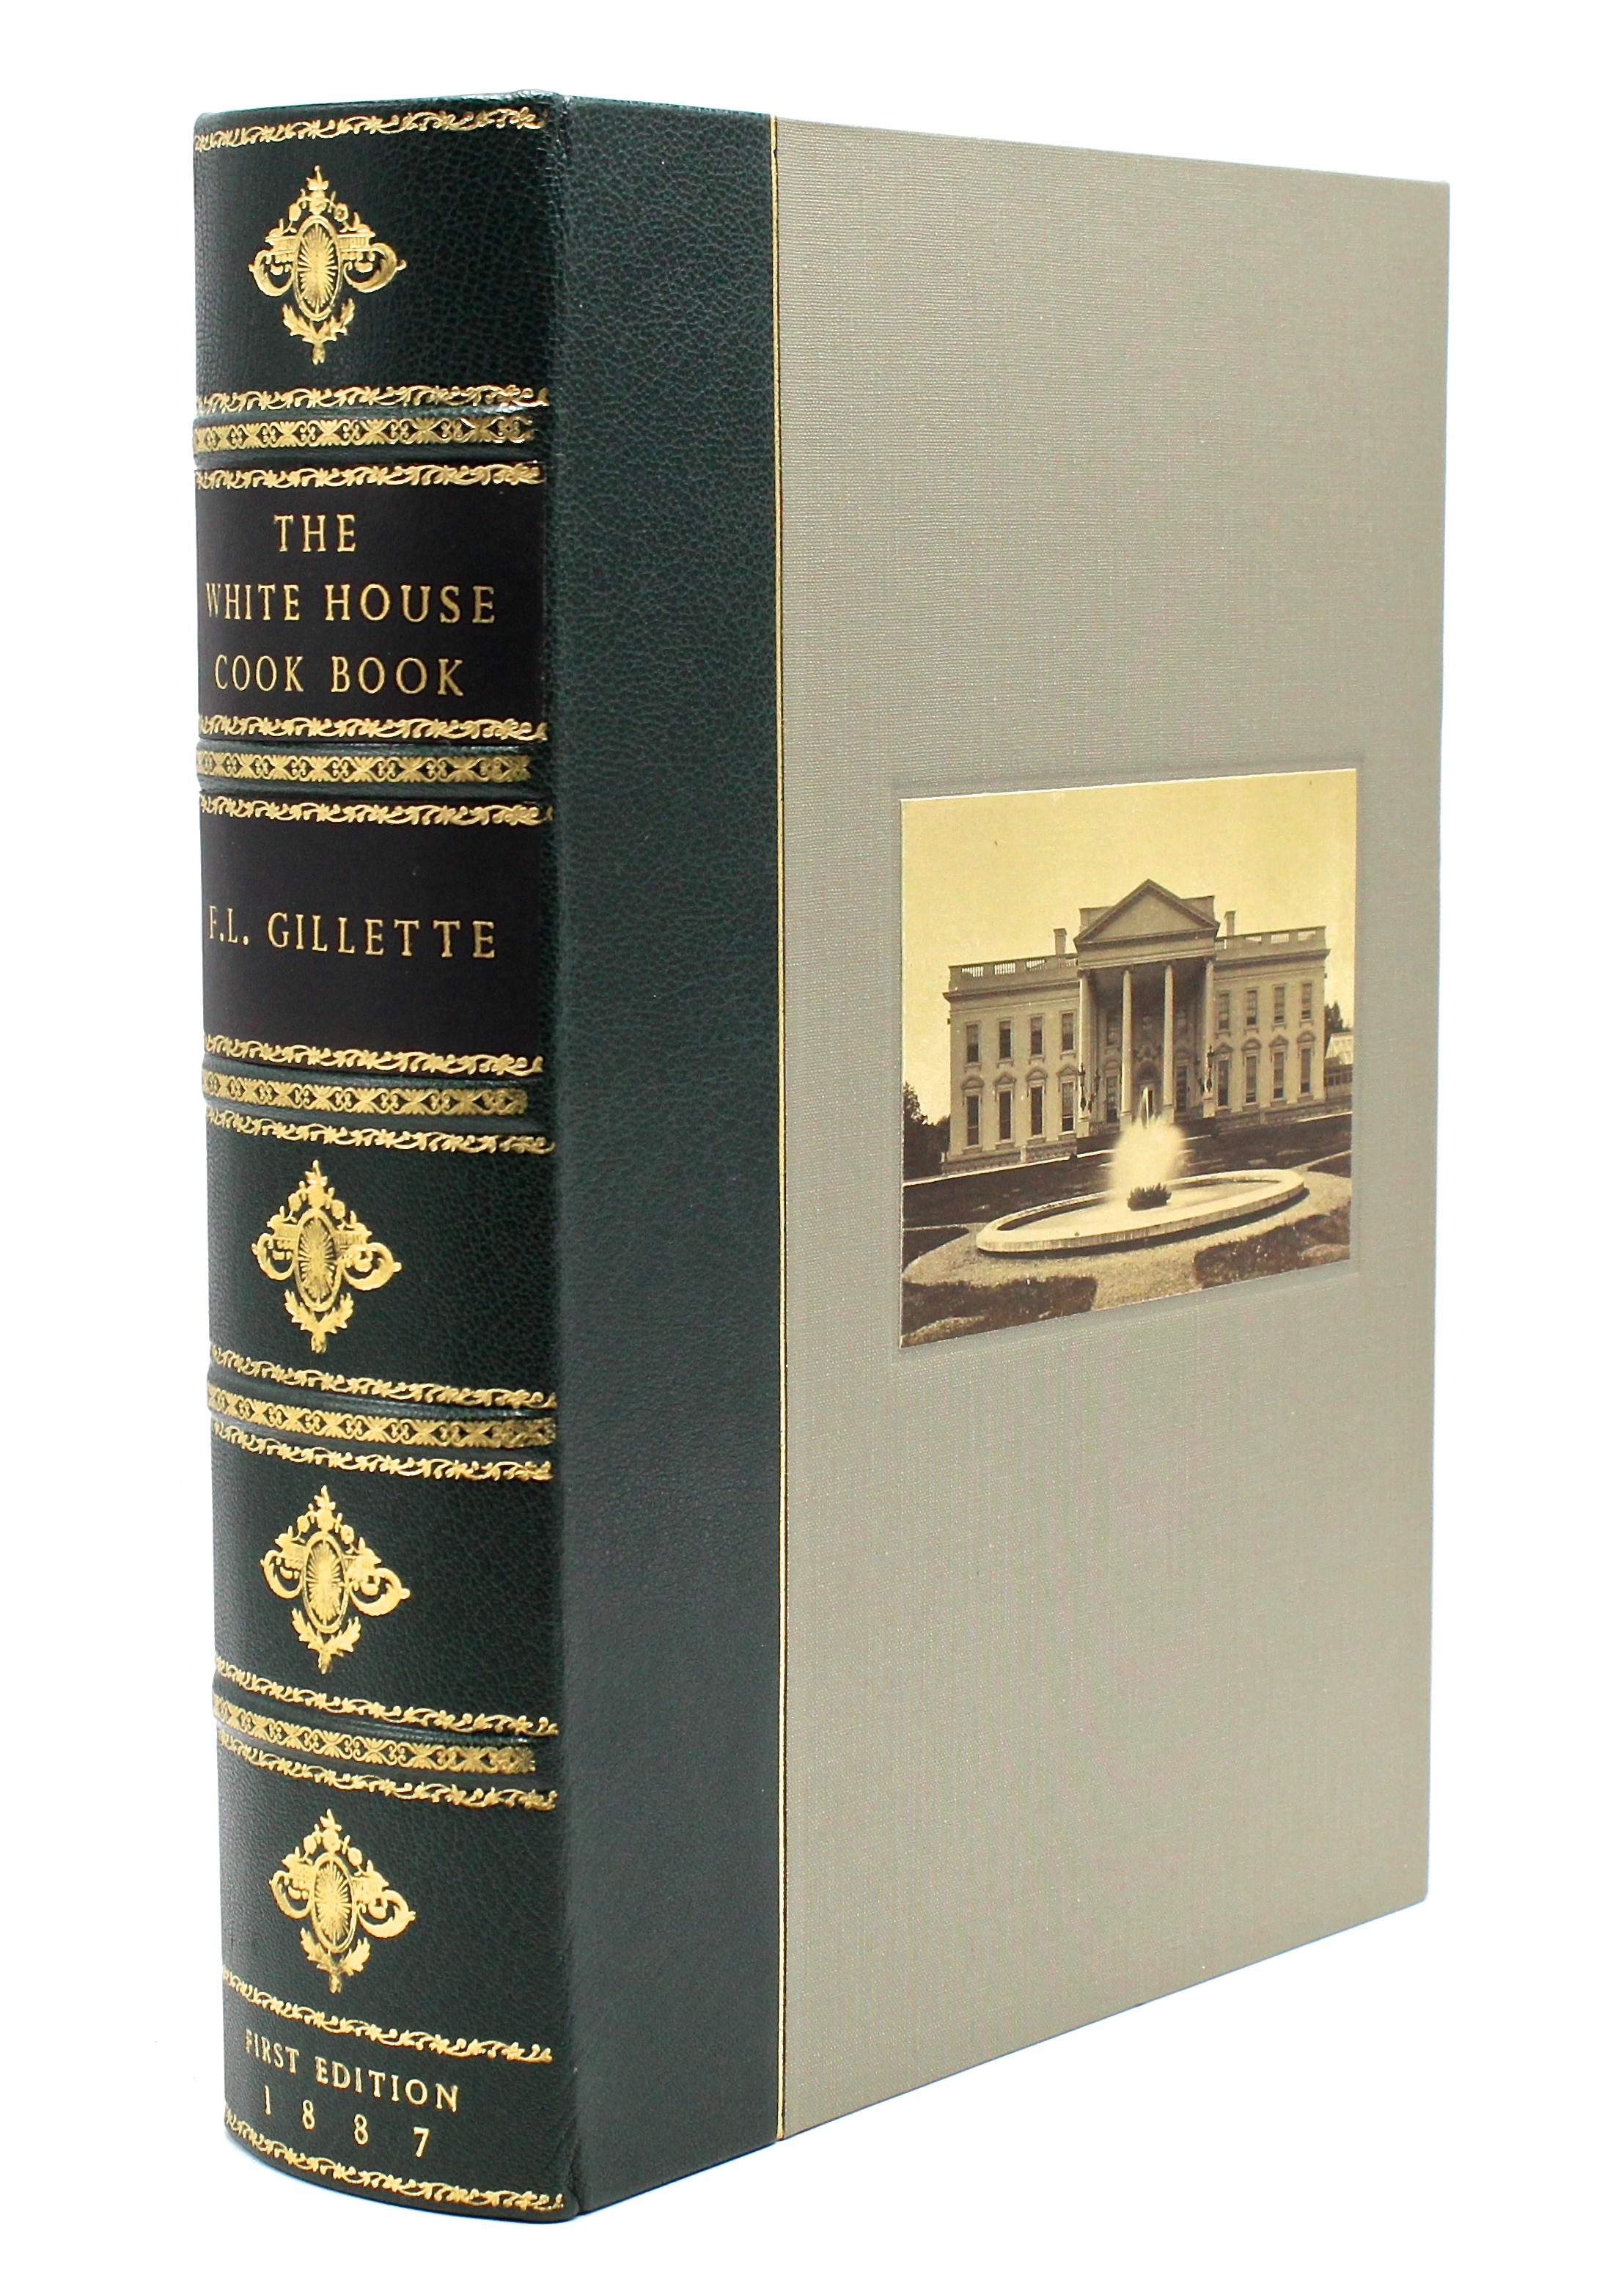 Late 19th Century White House Cook Book by F. L. Gillette, First Edition, 1887